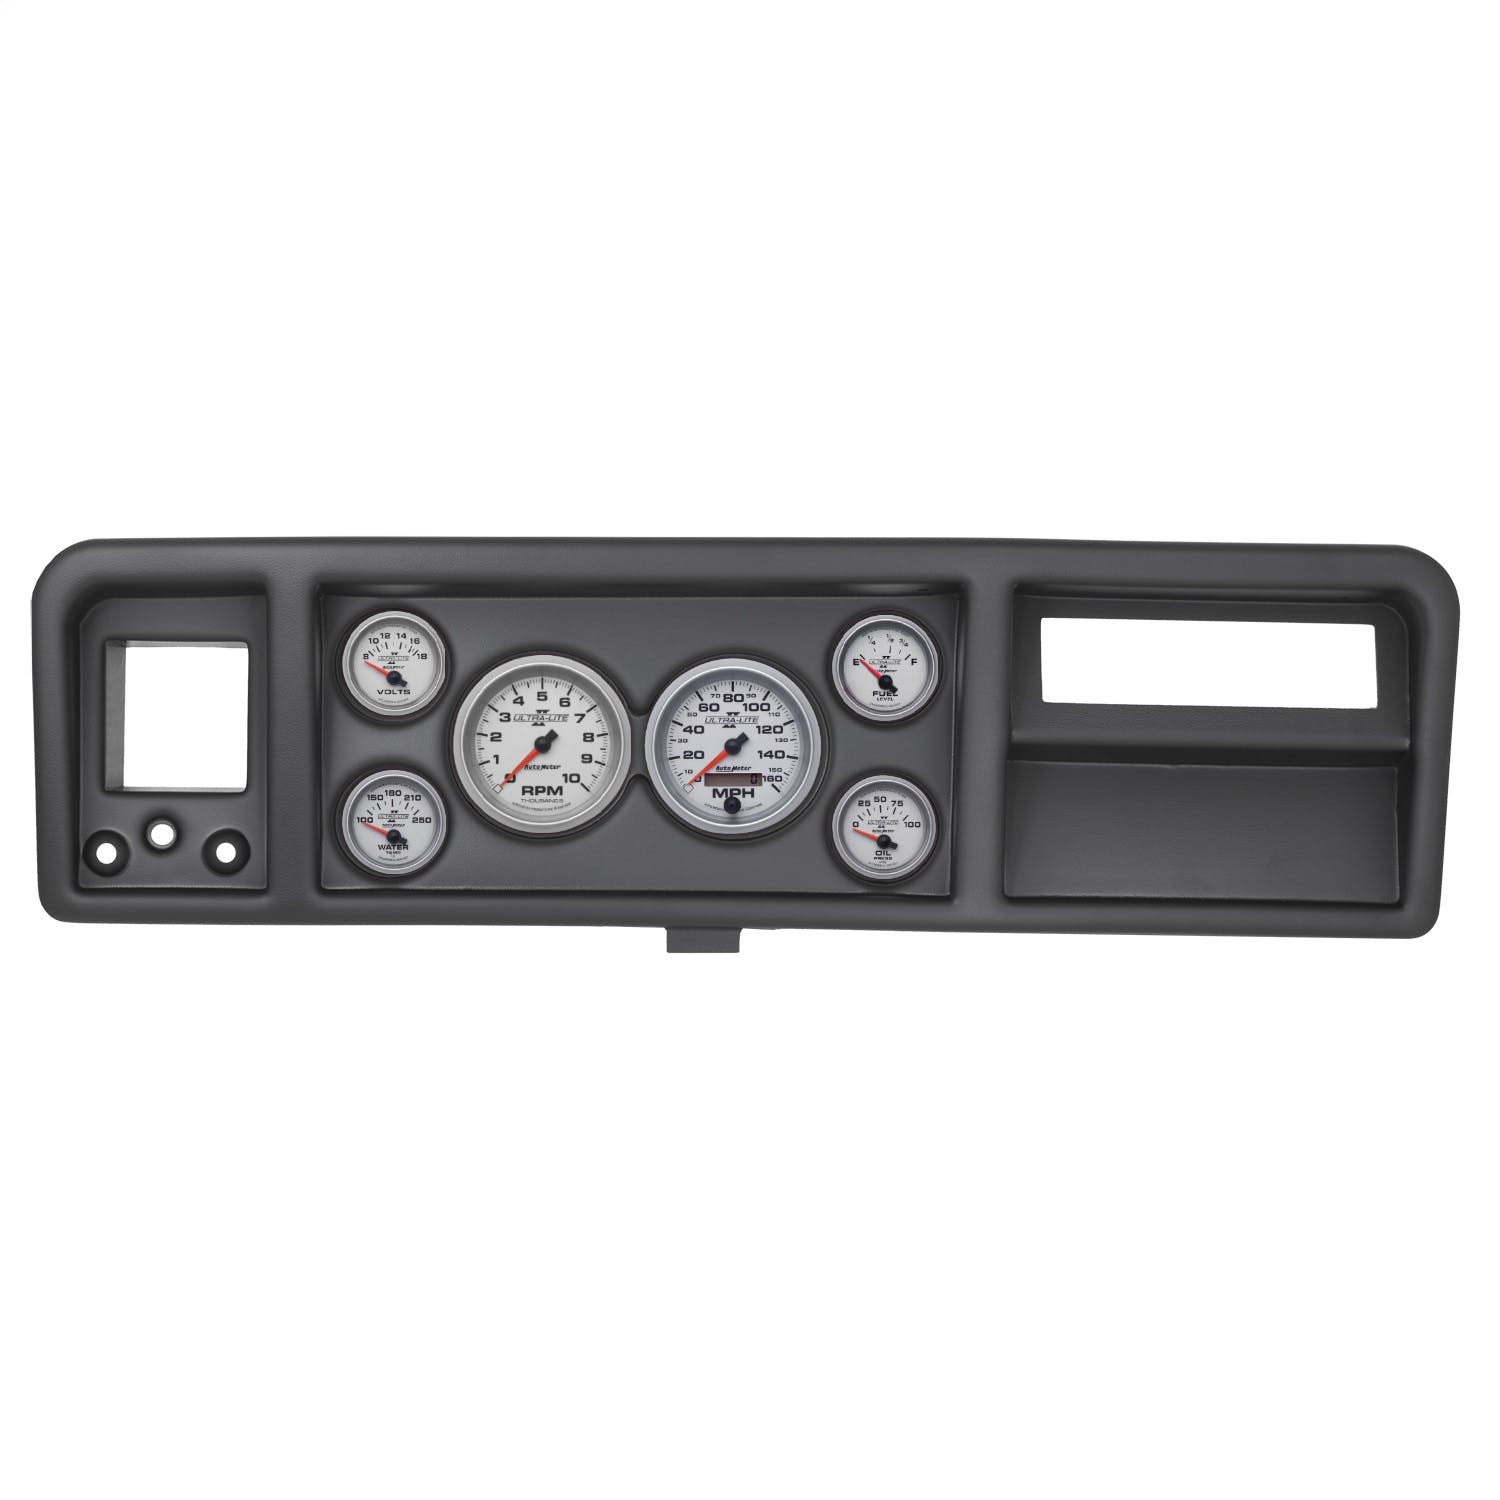 AutoMeter Products 2146-14 6 Gauge Direct-Fit Dash Kit, Ford Truck 73-79, Ultra-Lite II